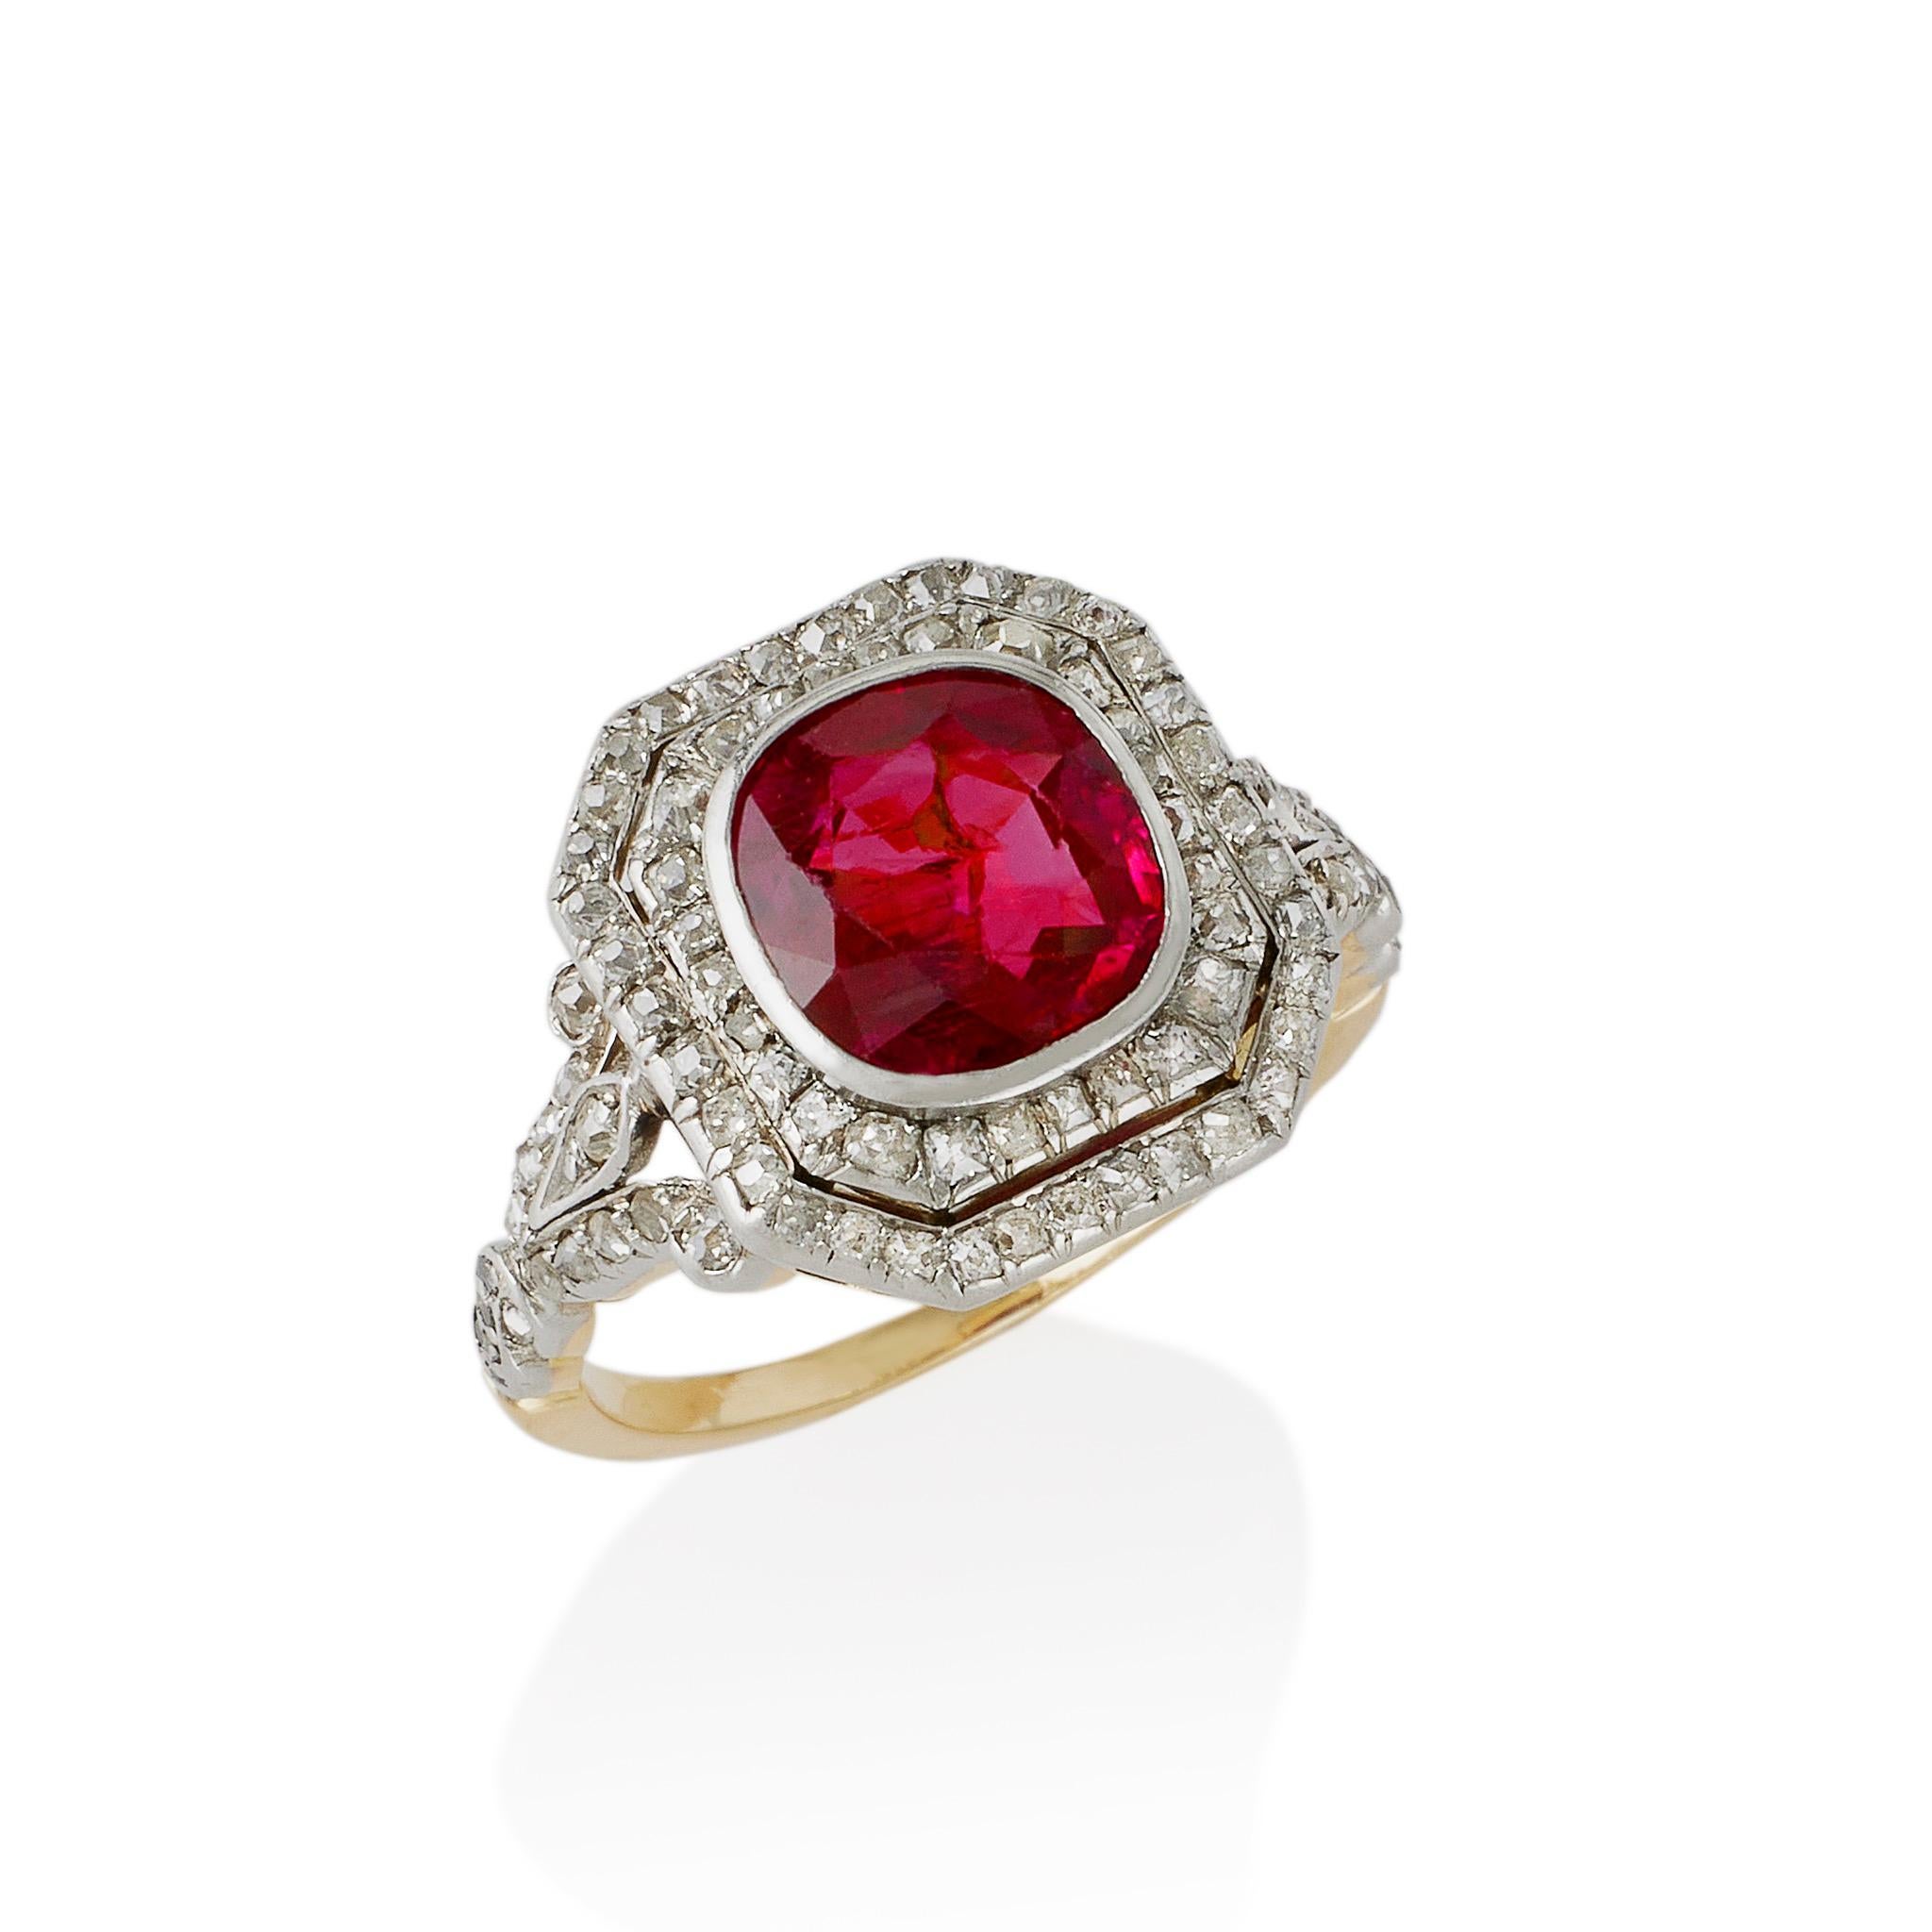 Dating from circa 1900, this ruby and diamond ring is set in platinum and 18K gold. It is bezel-set with an untreated Burma cushion-cut ruby, measuring approximately 8.05 x 7.65 x 3.95 mm, and weighing approximately 1.85 carats, framed by a stepped